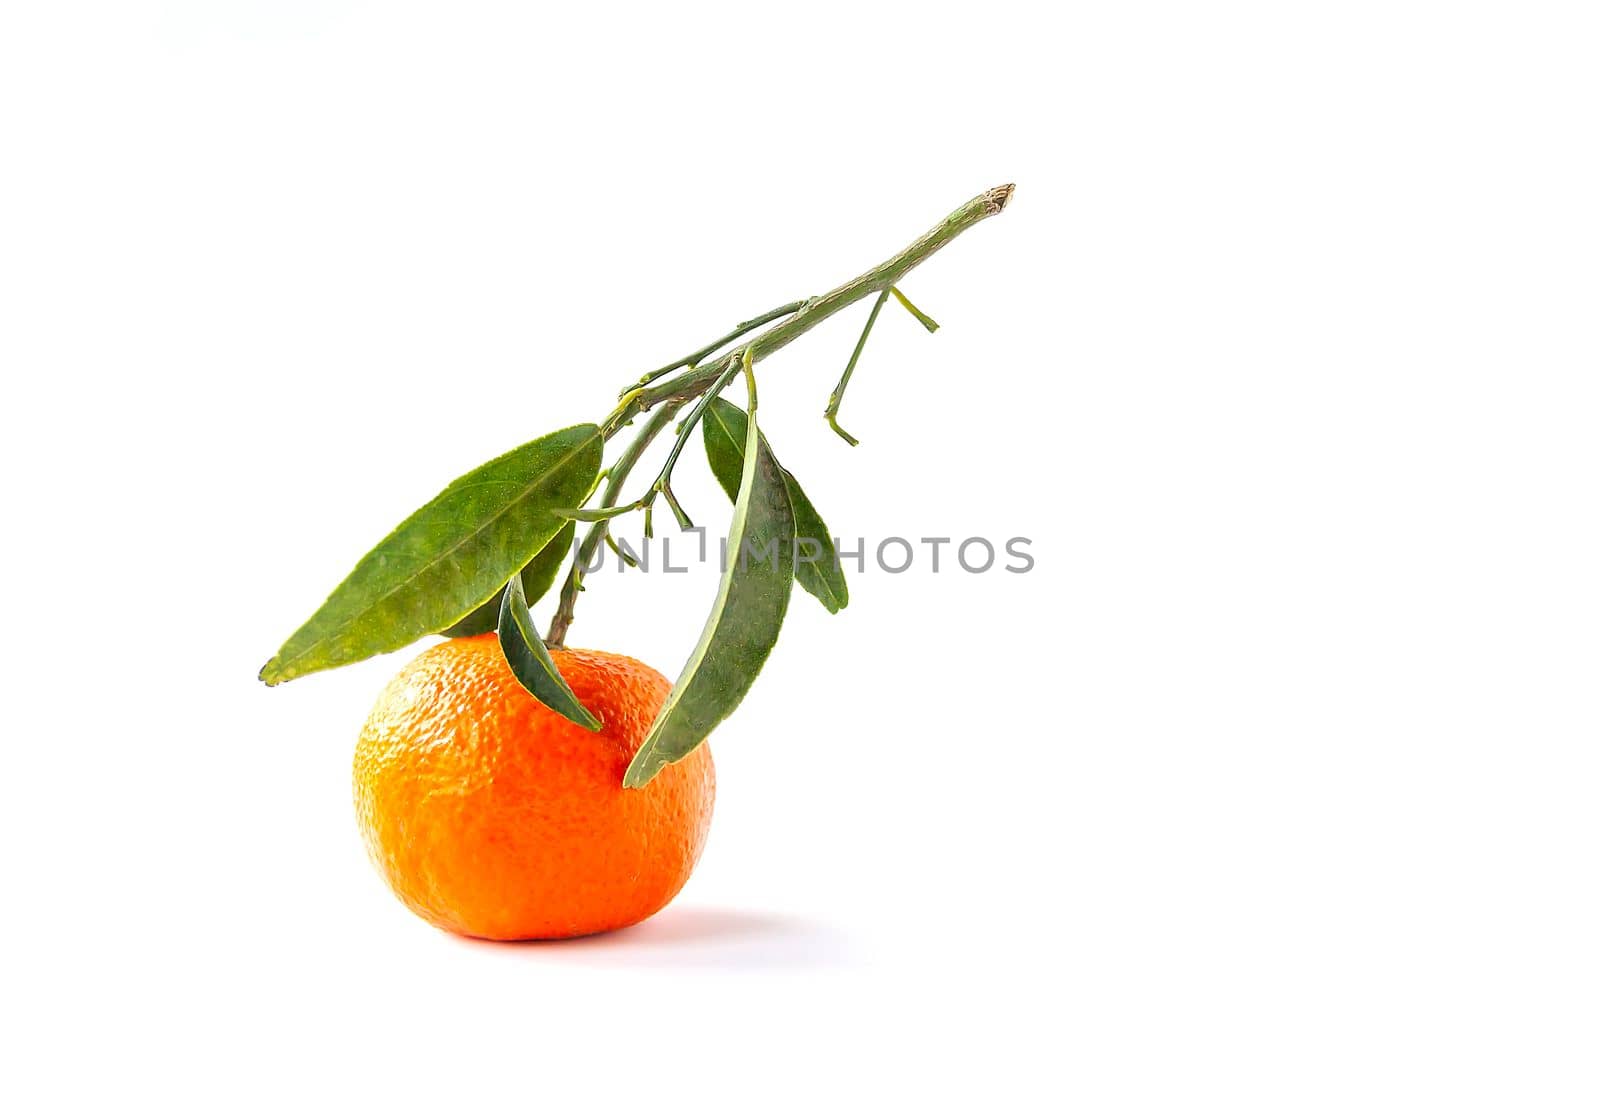 Orange fruit with green leaves on white background. by nightlyviolet